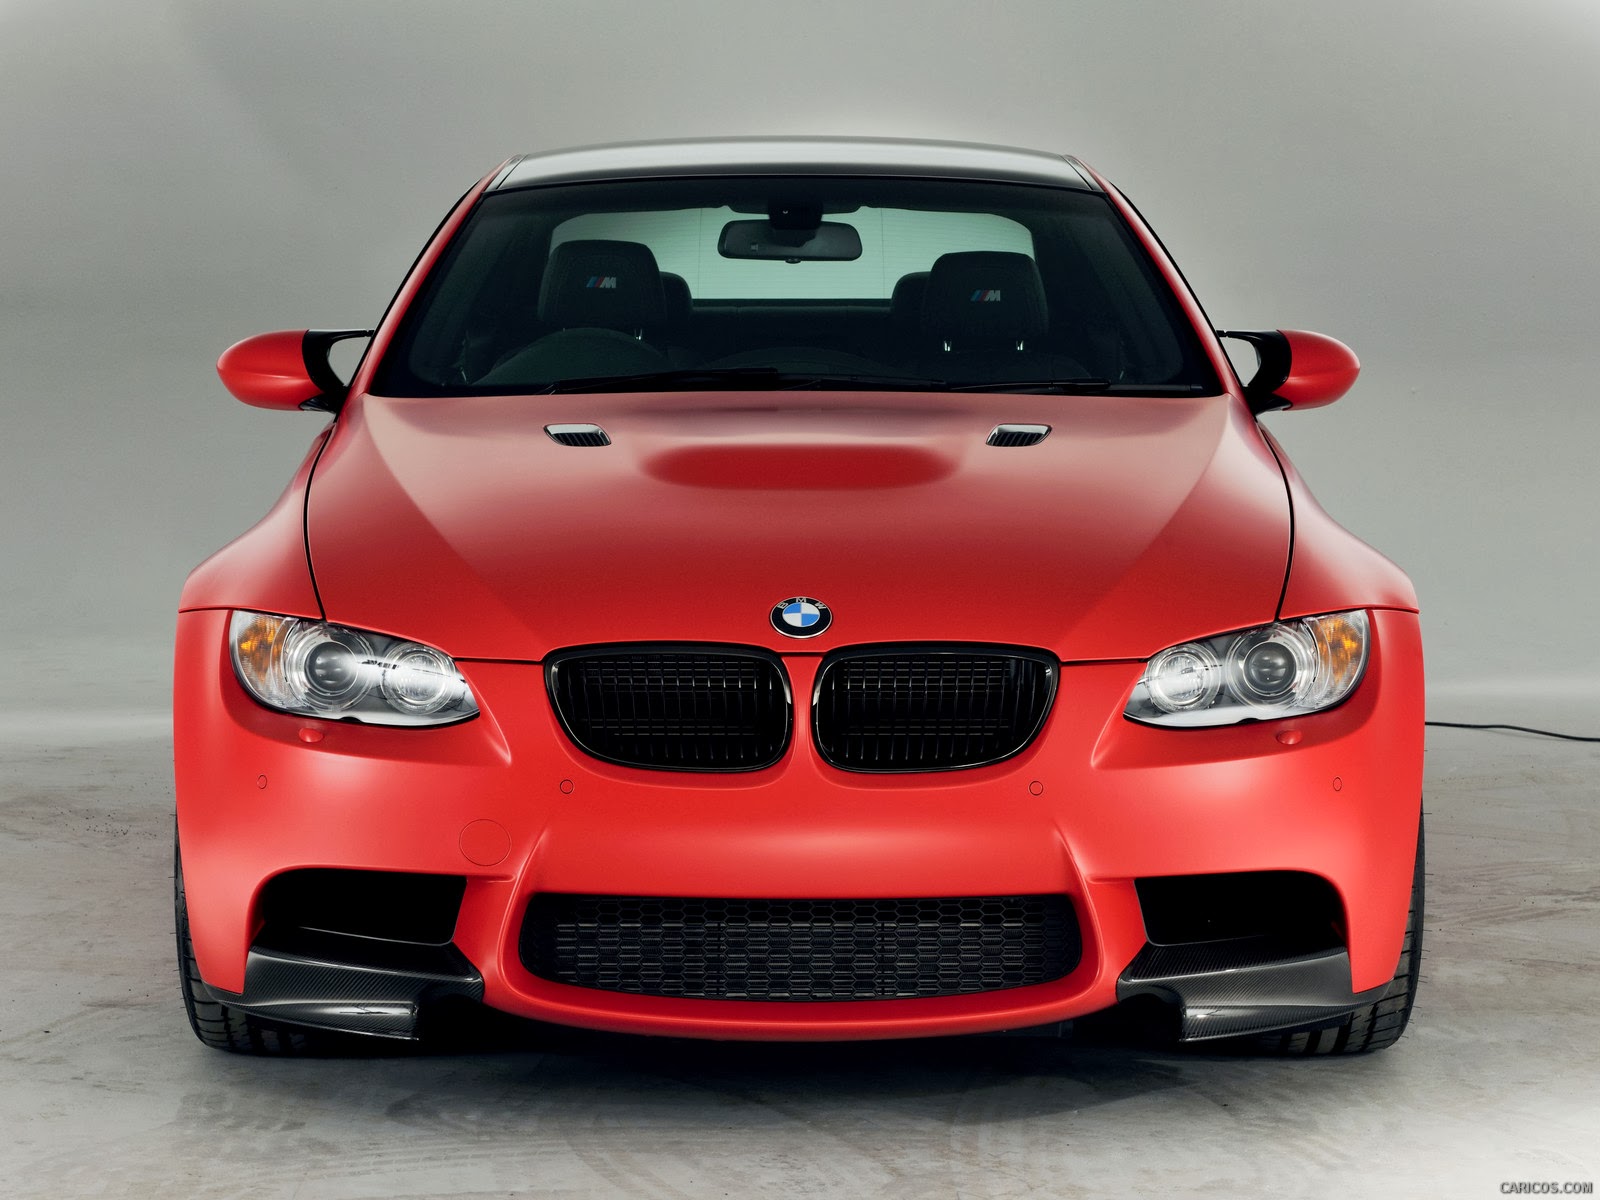 BMW M3 HD Wallpapers | HDWallpapers360.com - High Definition ...